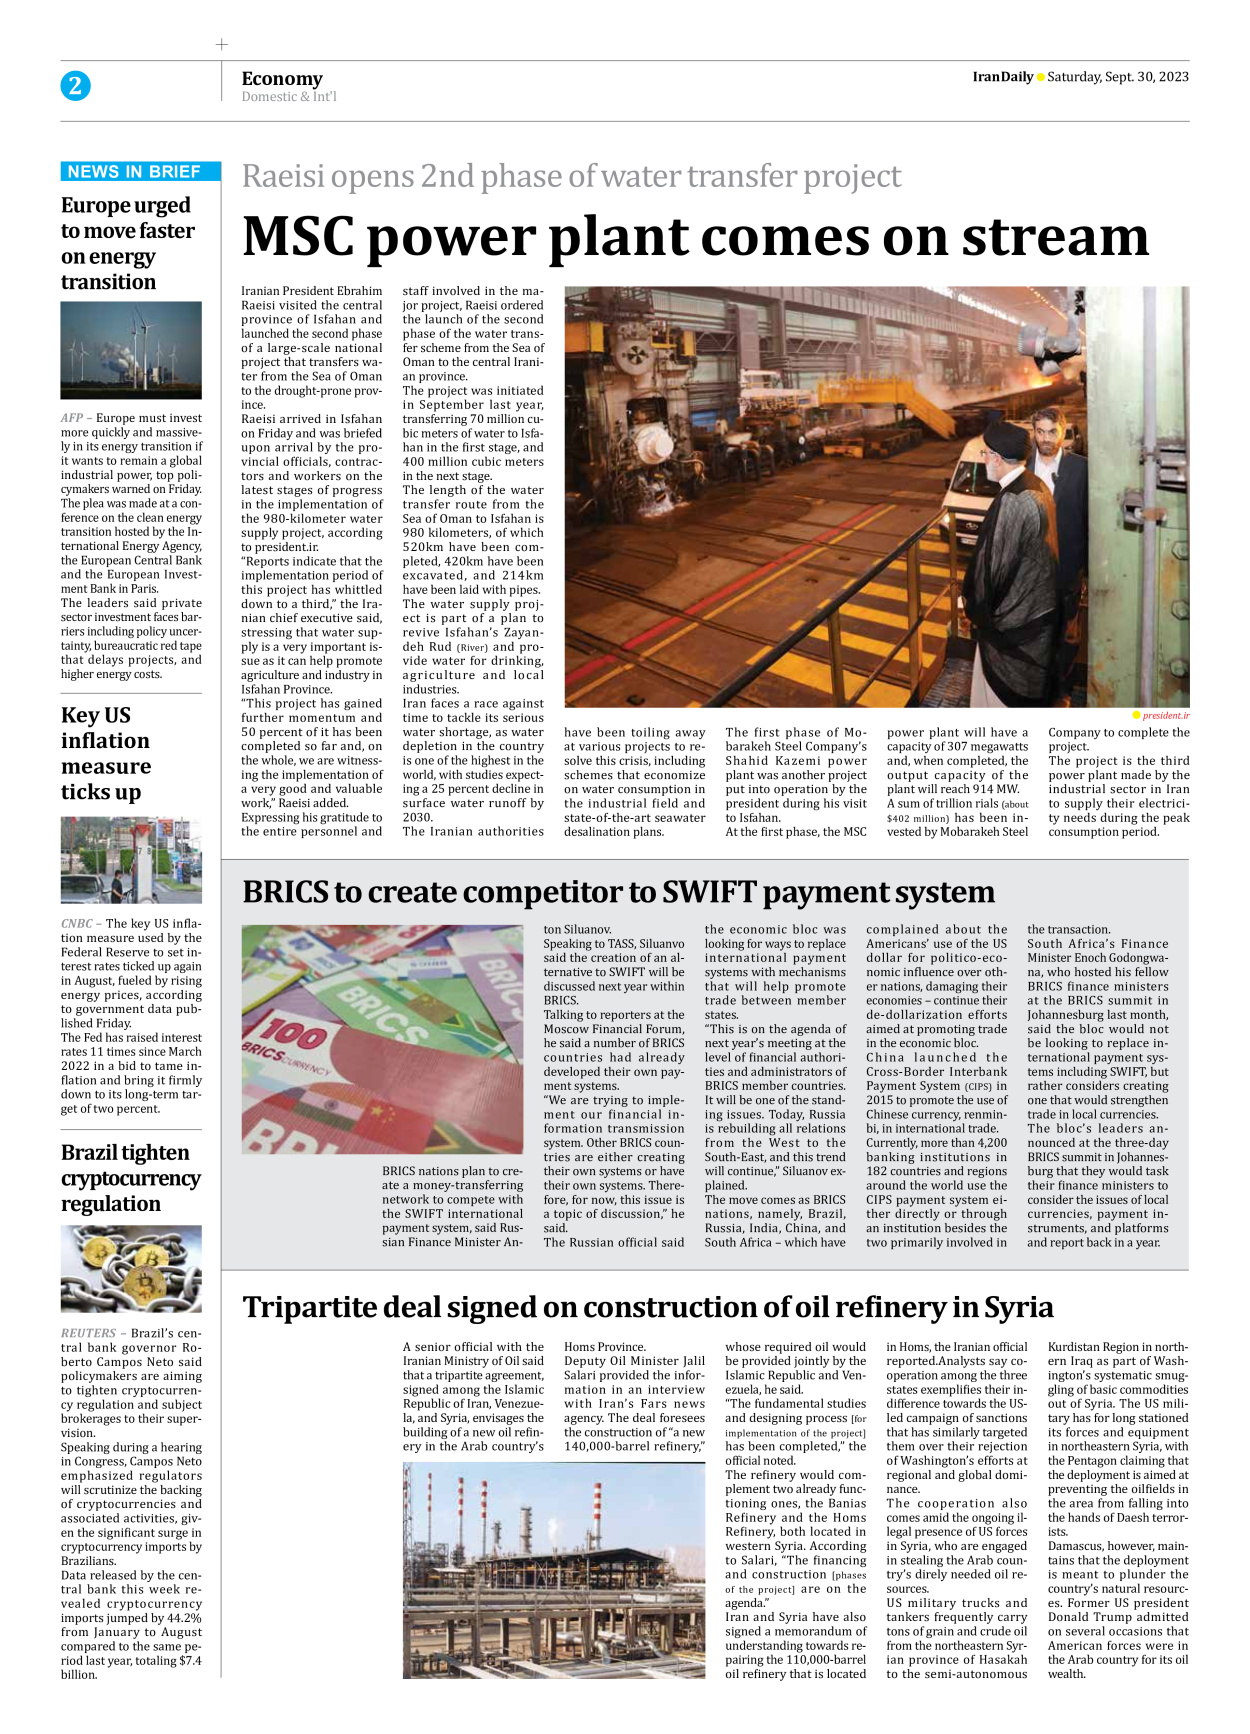 Iran Daily - Number Seven Thousand Three Hundred and Ninety Six - 30 September 2023 - Page 2